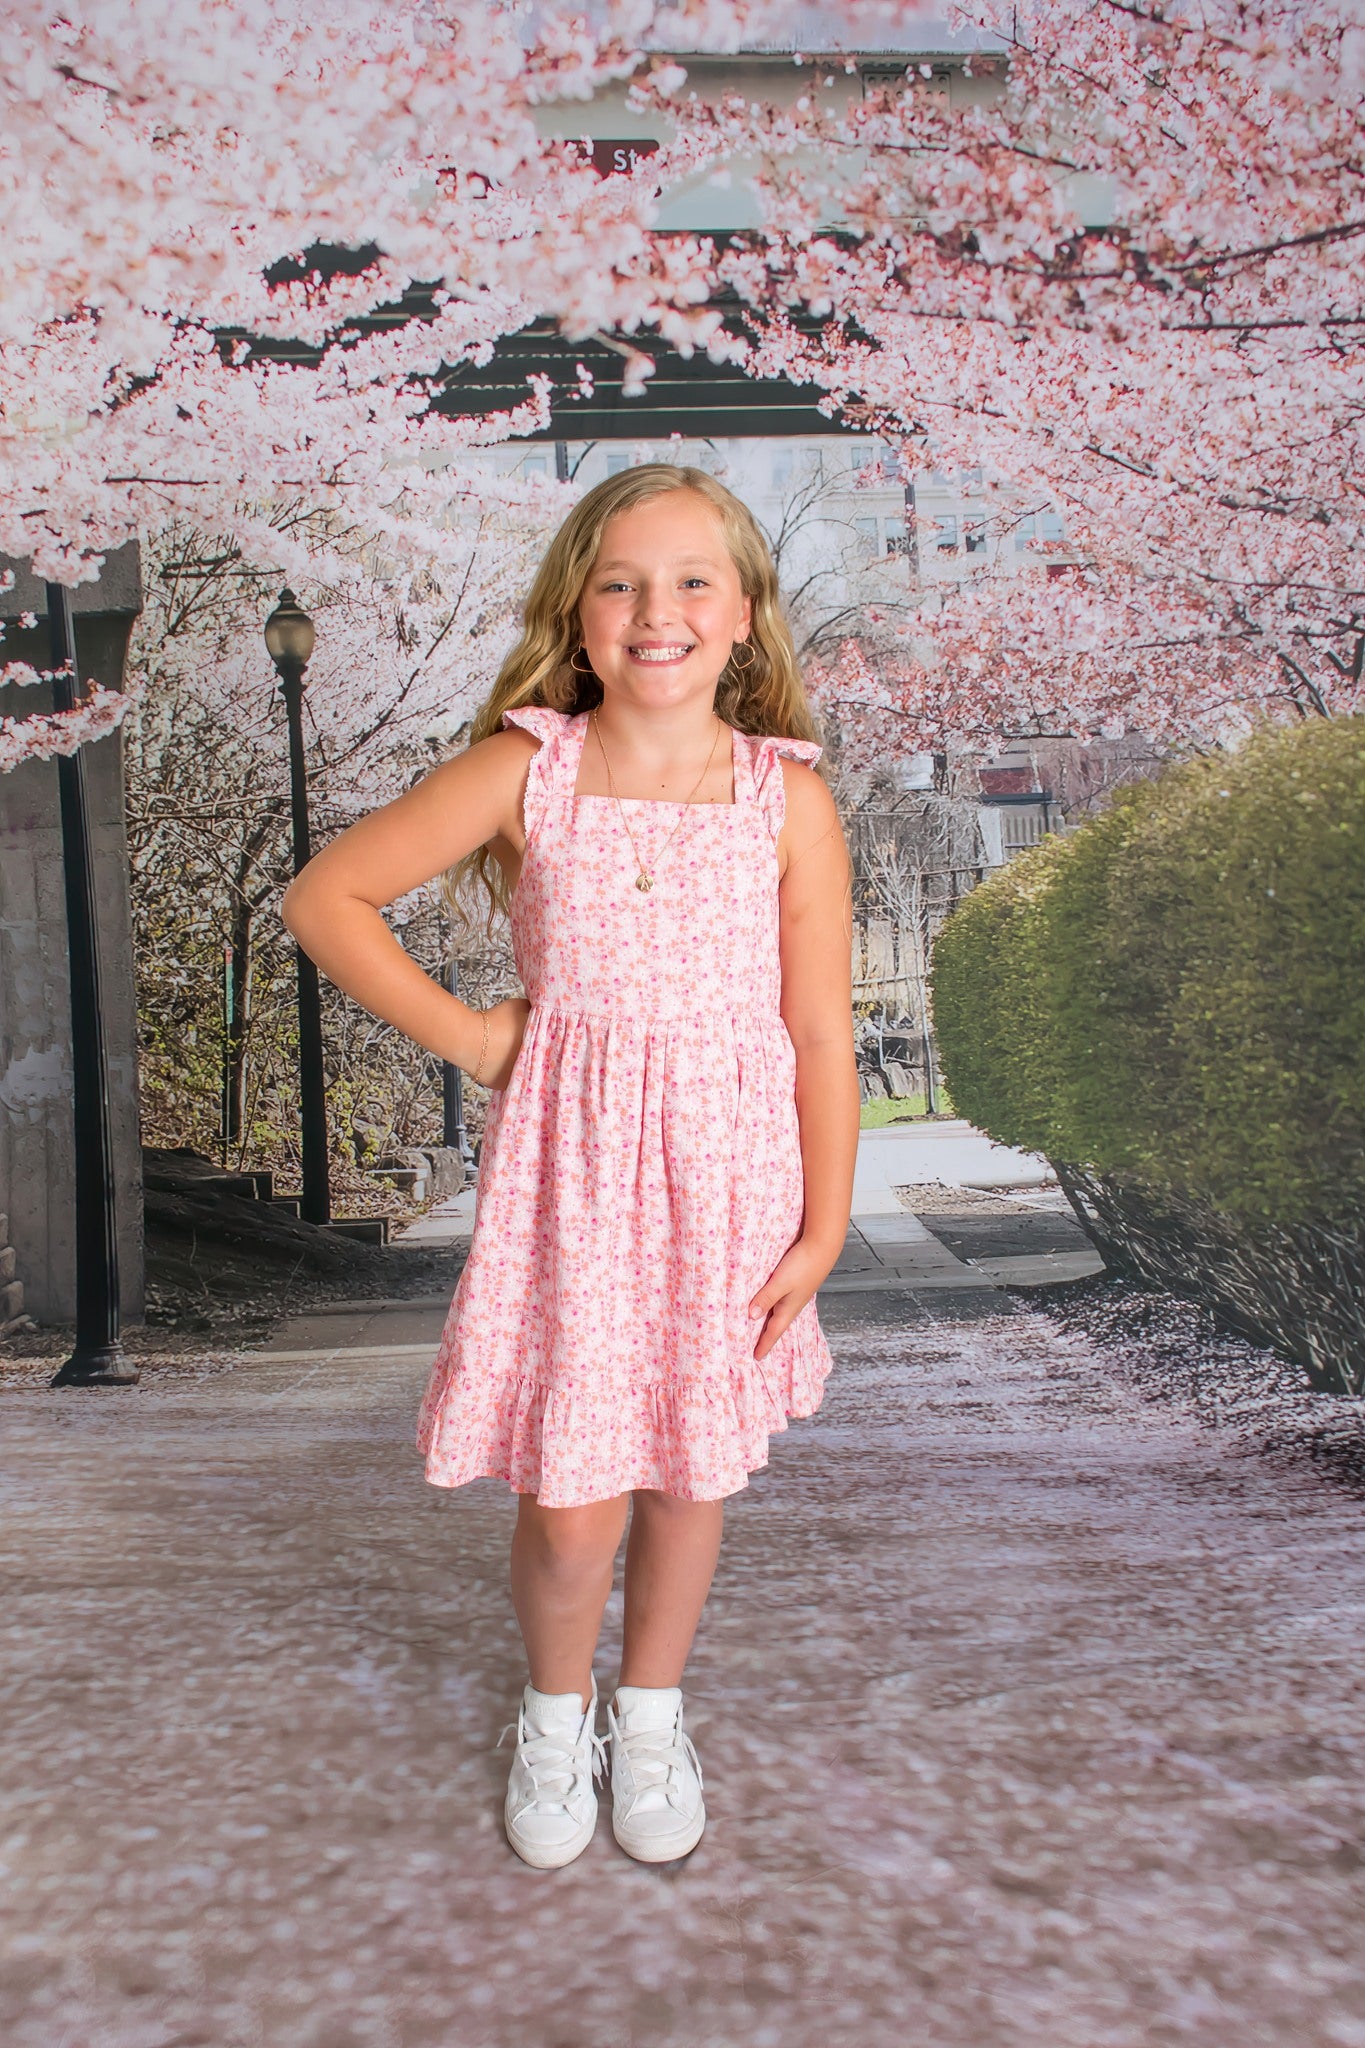 Kate Sweep Summer Cherry Blossom Archway Backdrop for Photography Designed by Erin Larkins